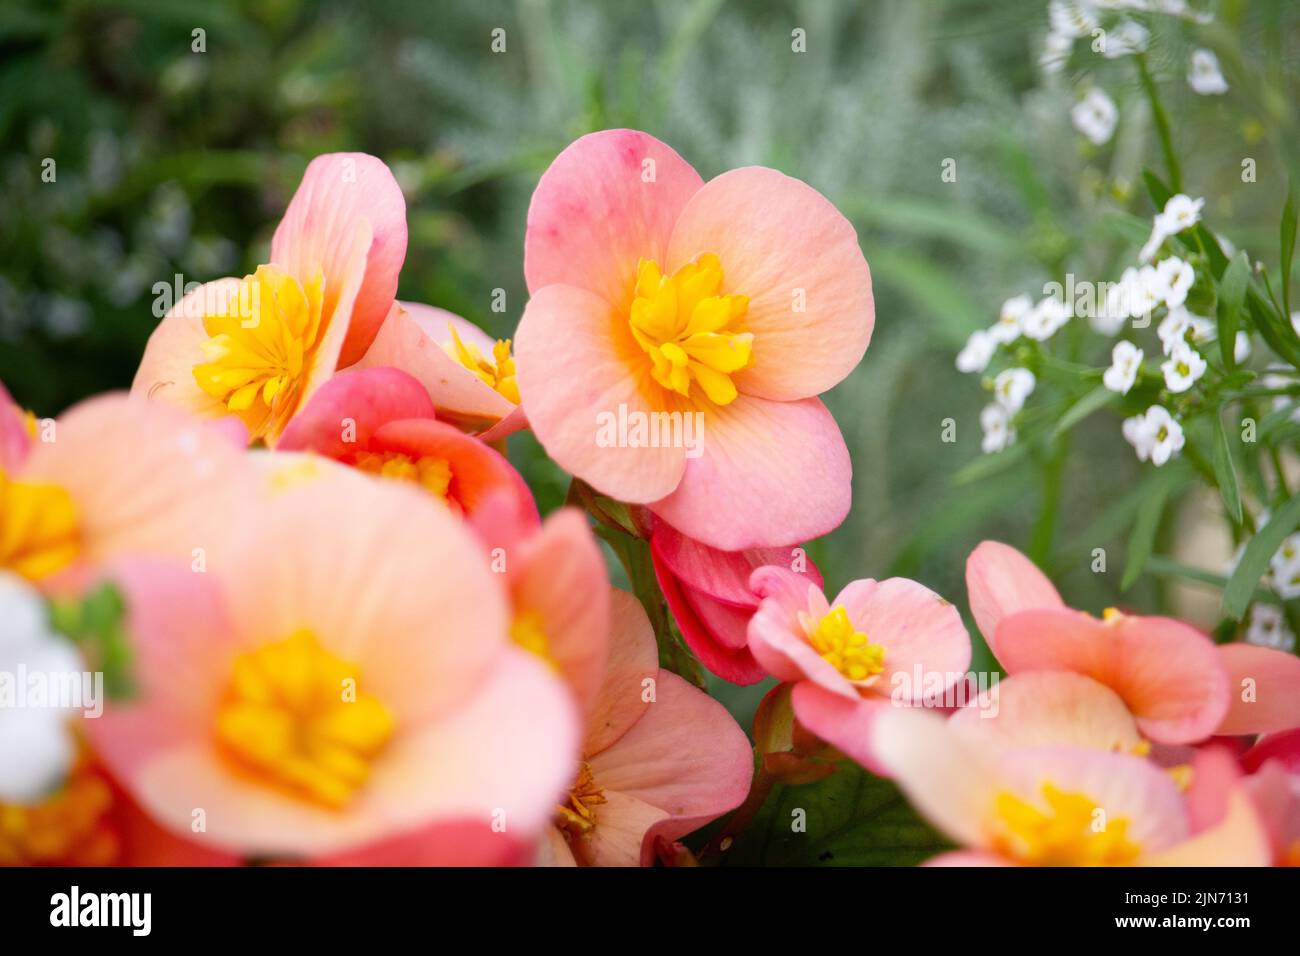 The beautiful pink and yellow Wax begonia flowers in the garden Stock Photo